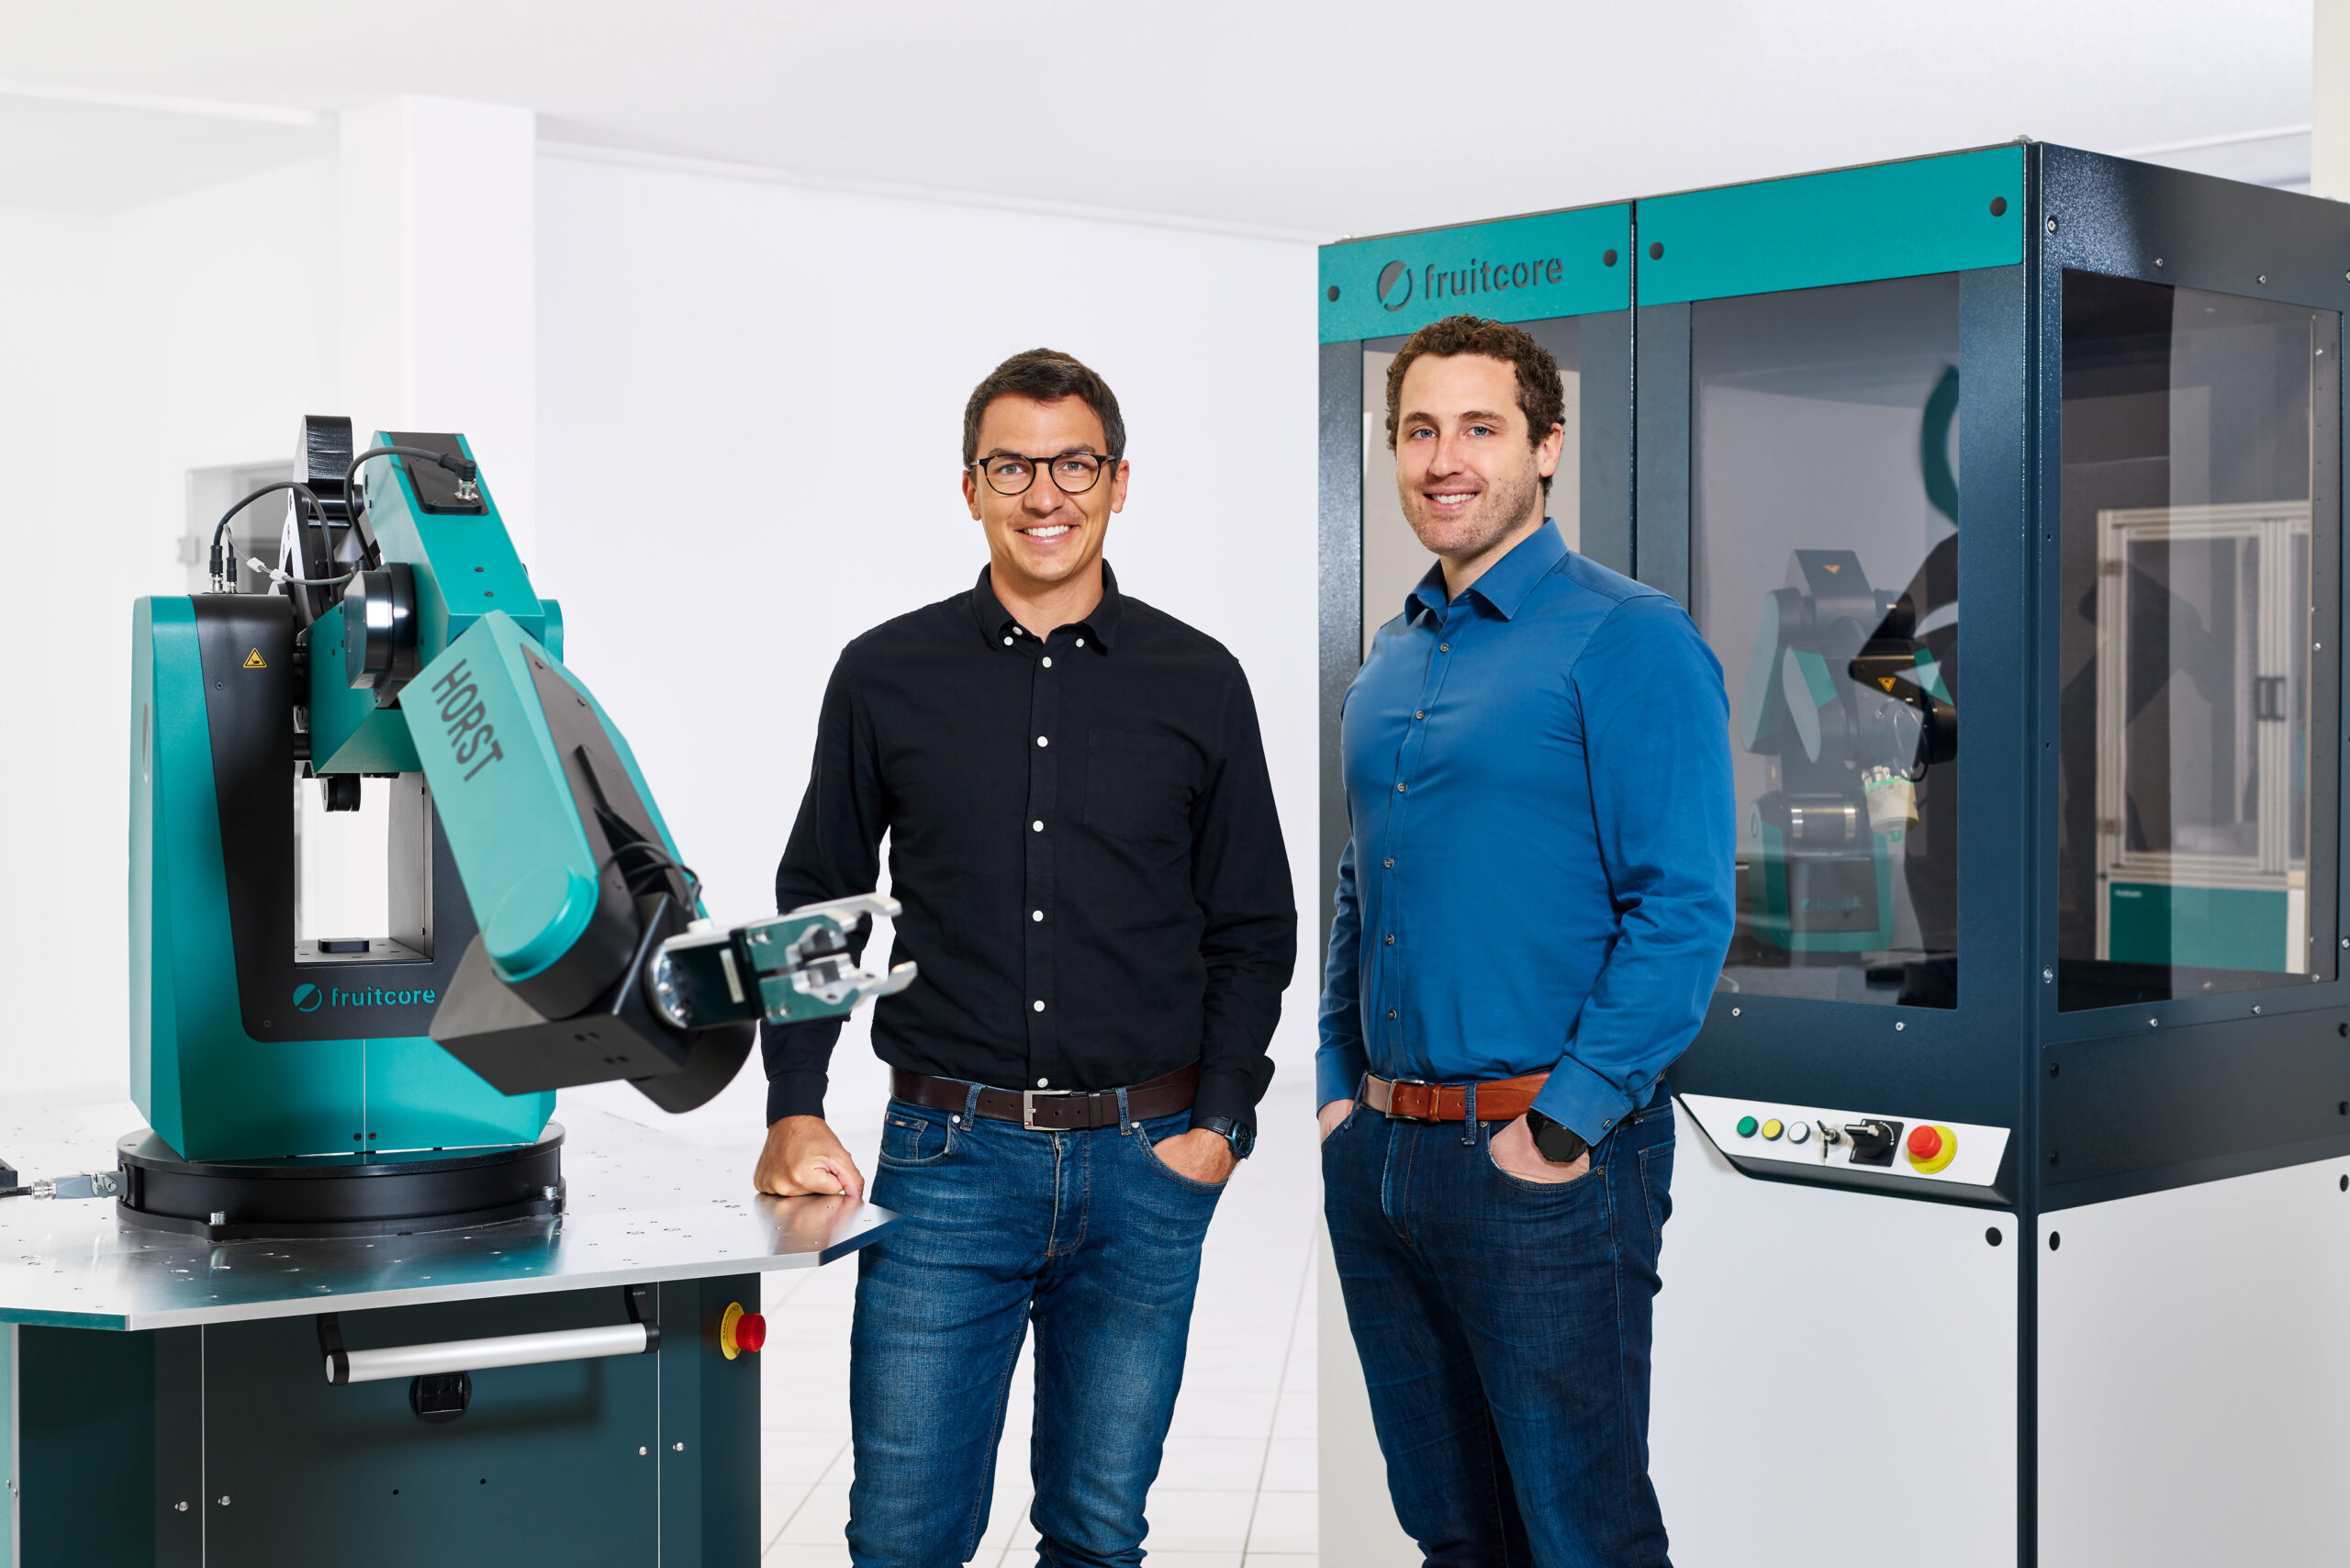 You are currently viewing Robots-Weblog | fruitcore robotics unveils new working system with built-in AI  copilot: a giant step in industrial automation for extra effectivity, consumer friendliness and time 